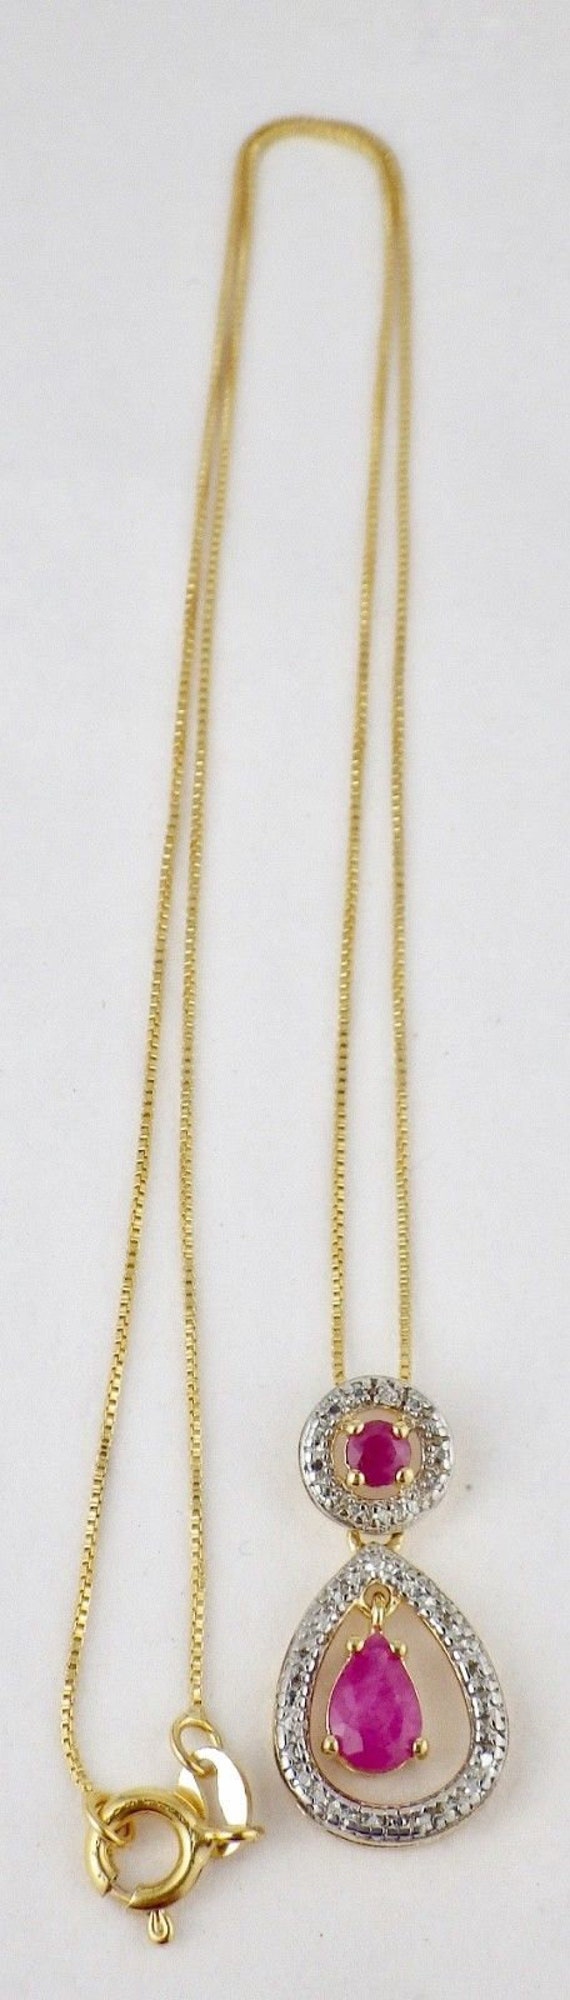 Gold Vermeil 925 Sterling Silver 1.08 CTTW Natural